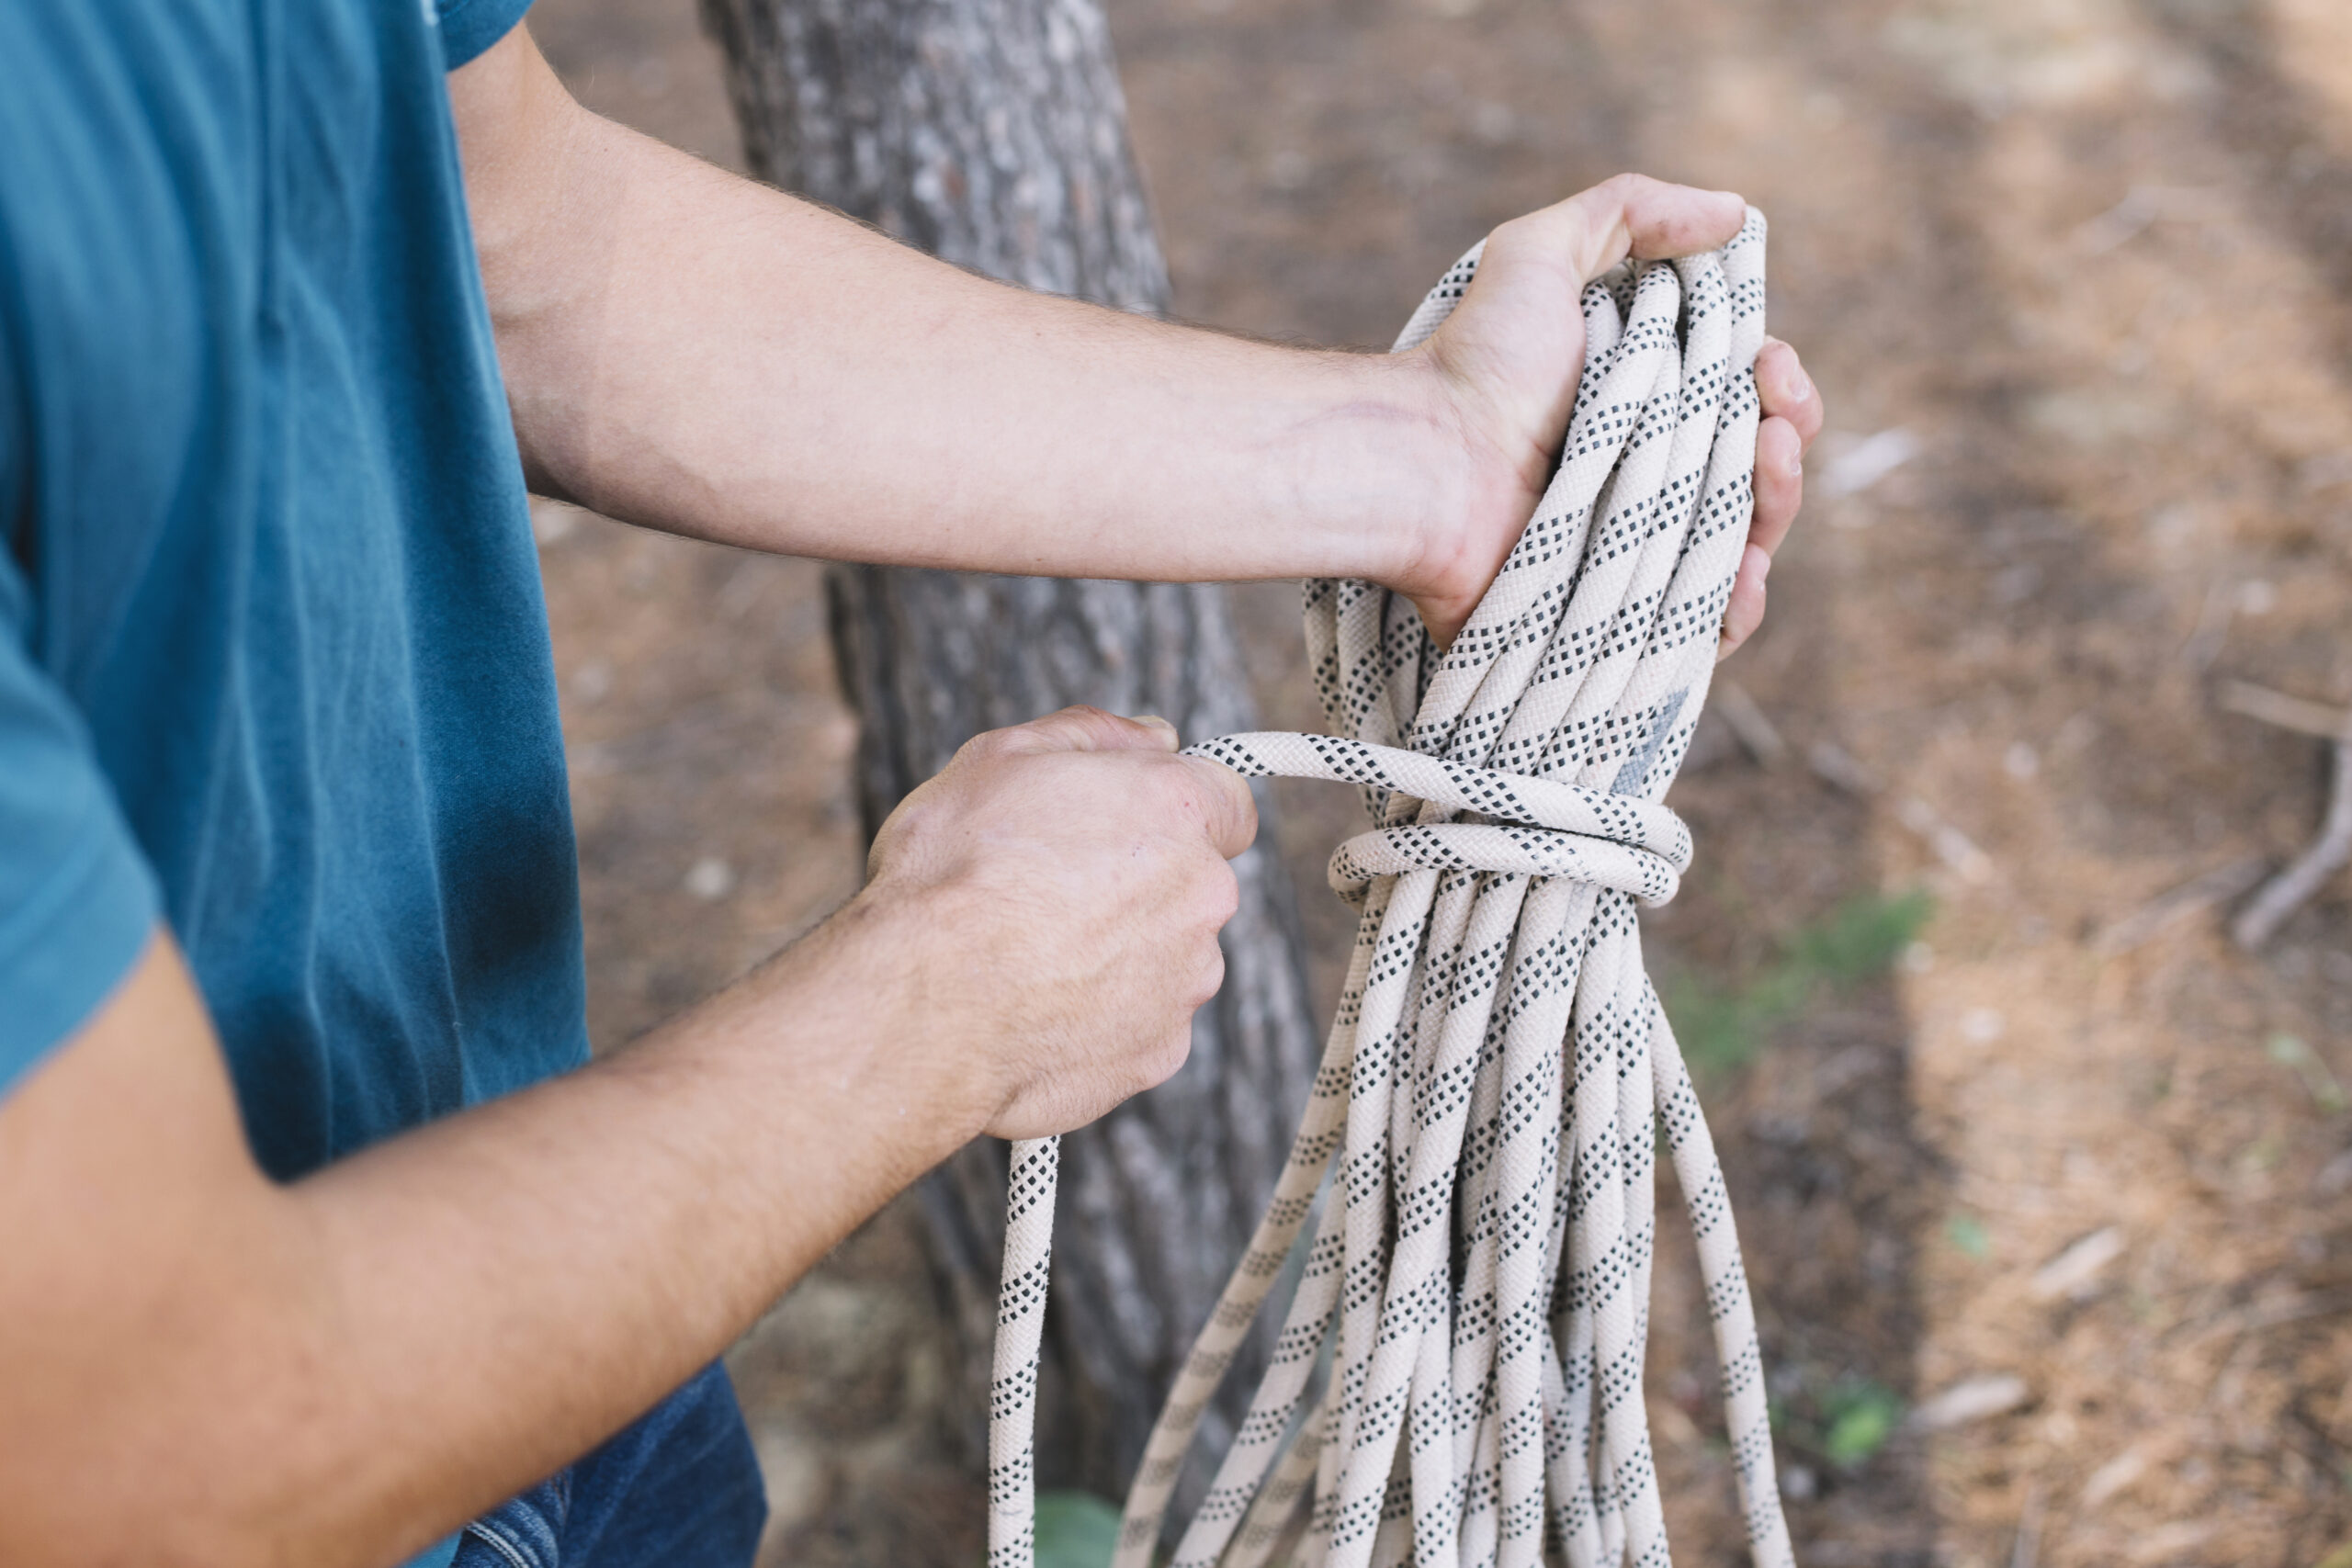 A person holding up different types of ropes and examining their texture and thickness to determine which one is best suited for rappelling.